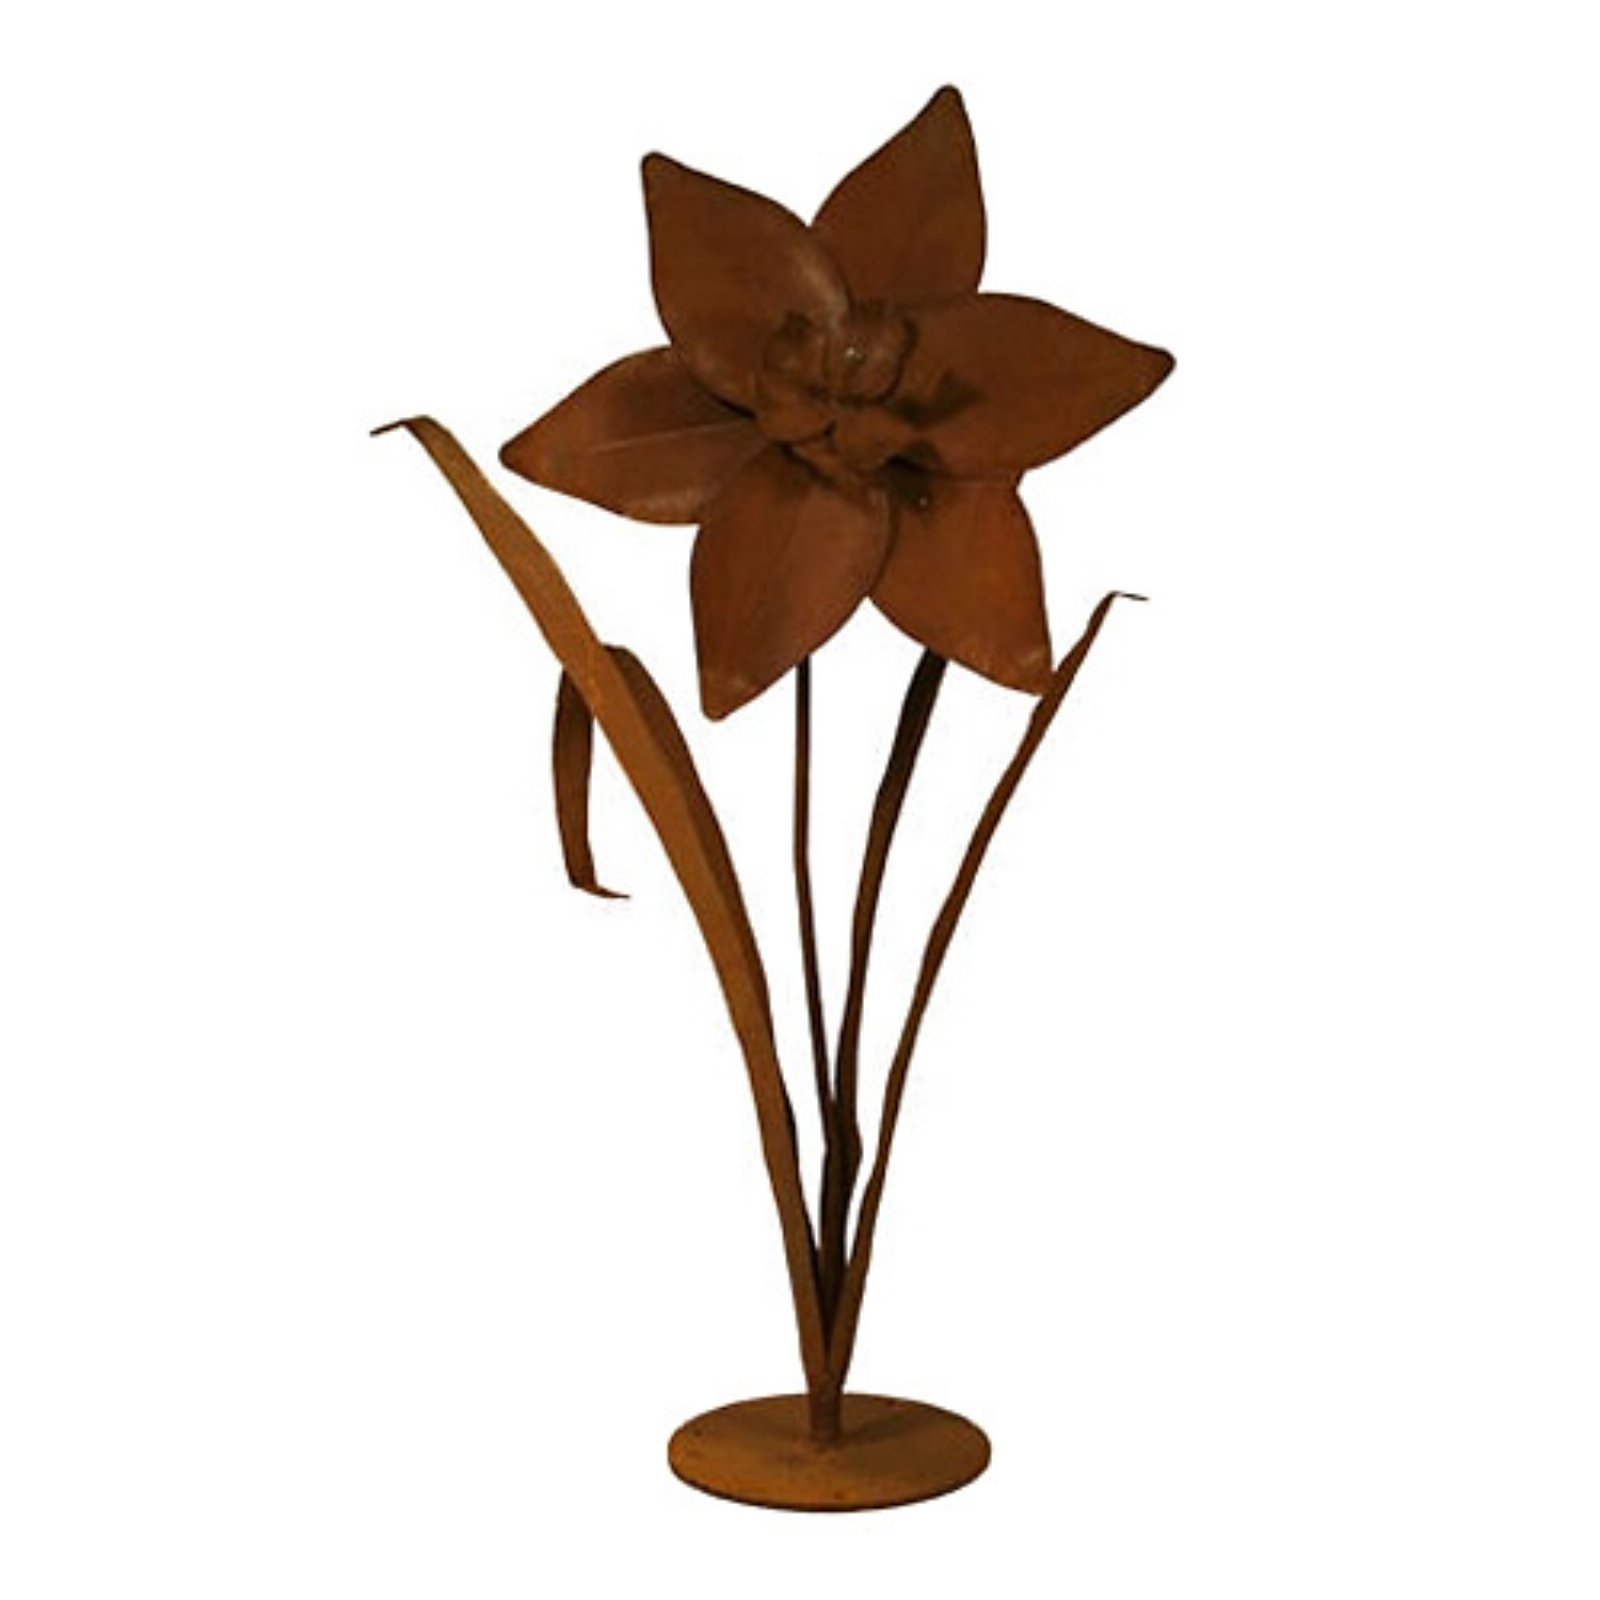 Patina Daffodil Outdoor Metal Sculpture - image 2 of 2